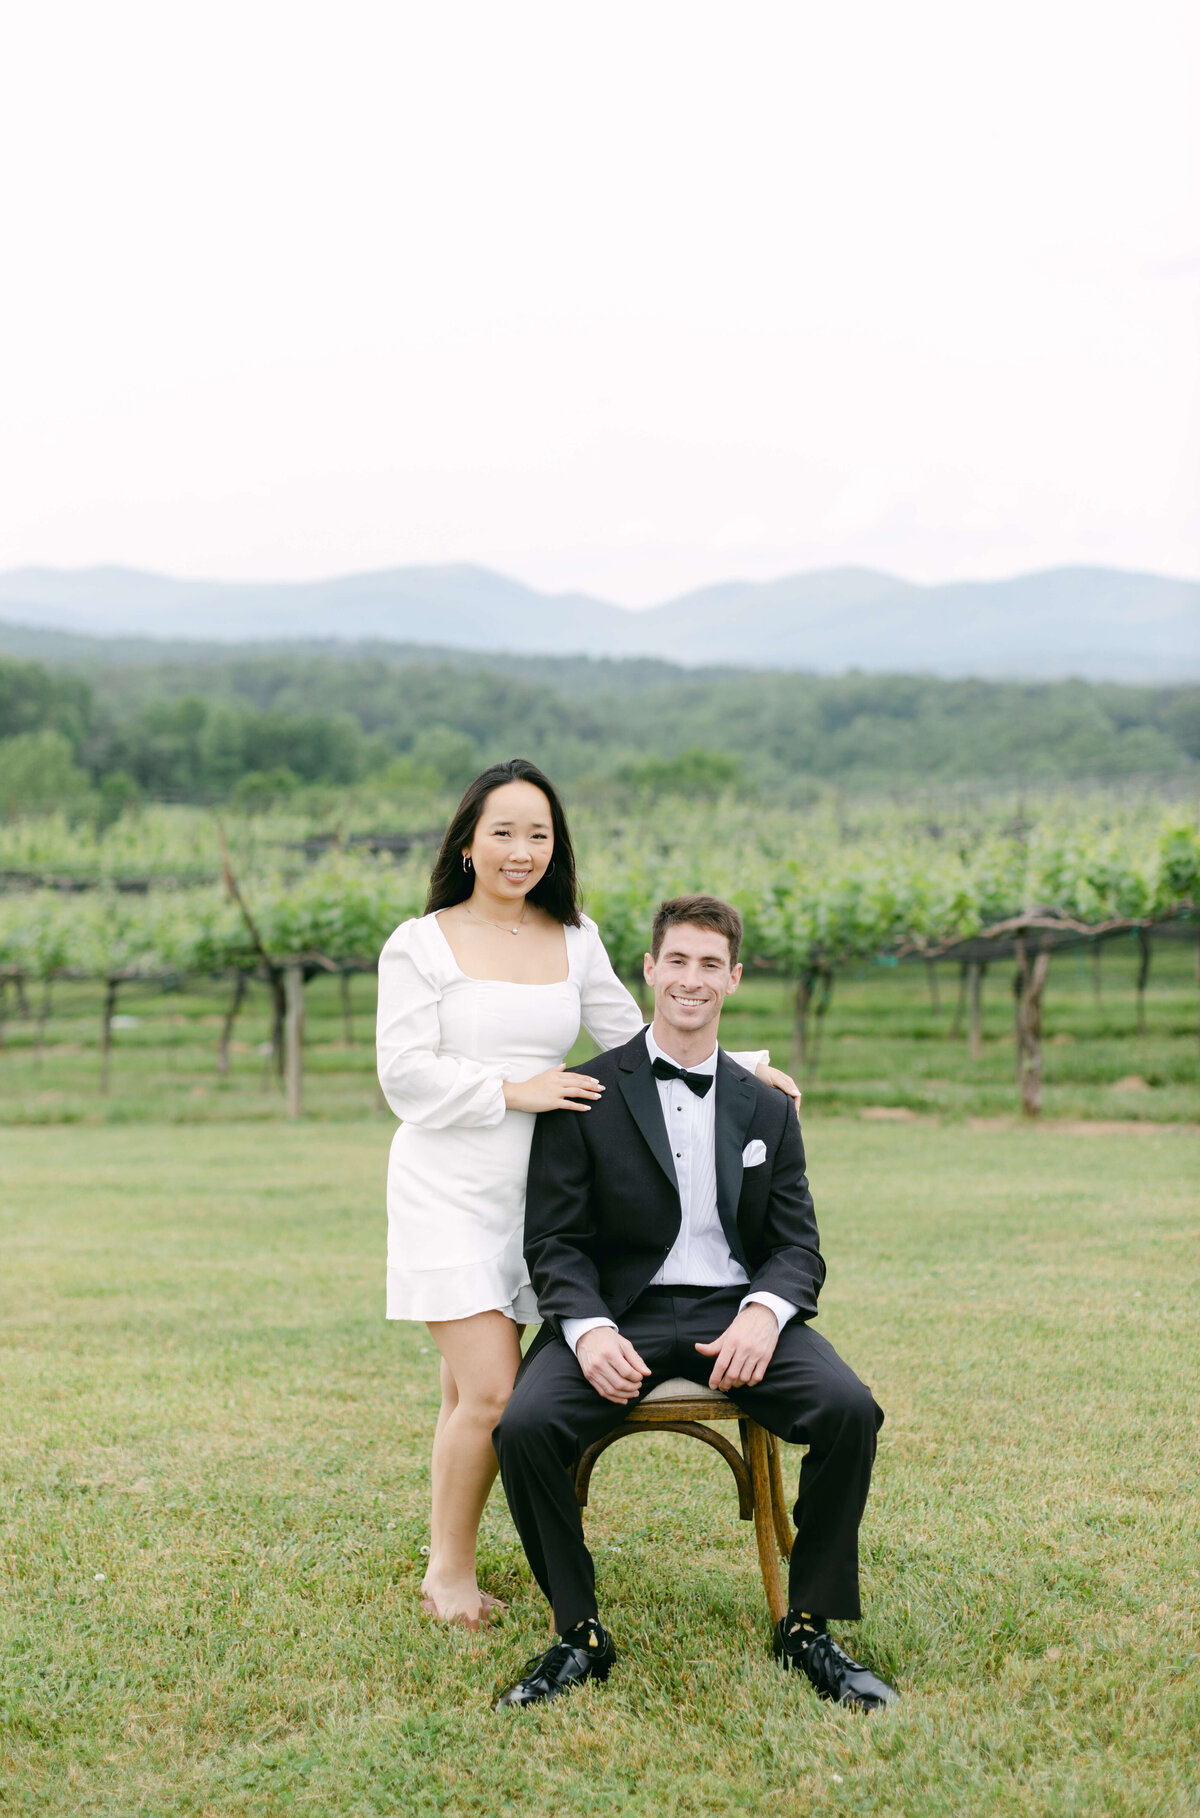 A groom sits in a chair while his bride stands over him.